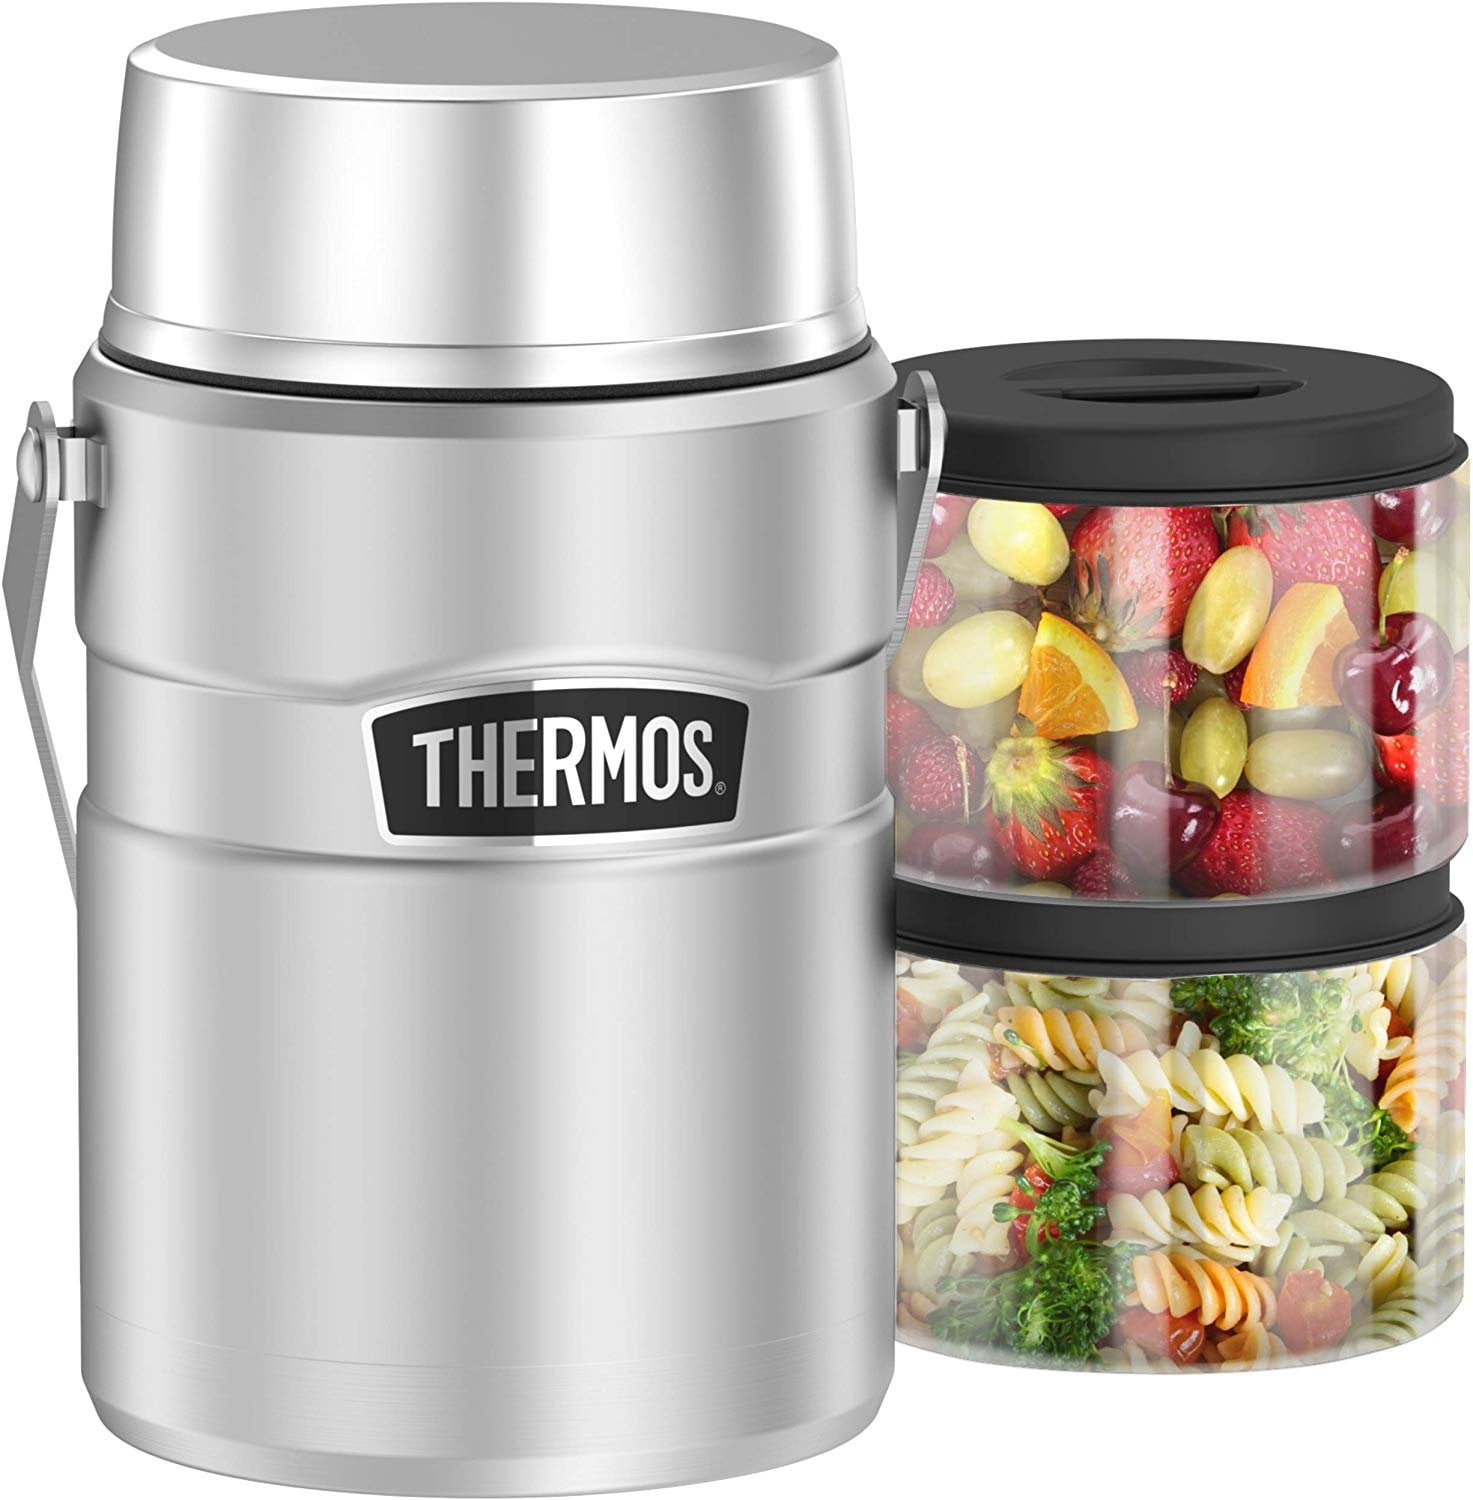  Thermos Food Jar with Microwavable Container, 12-Ounce,  Stainless Steel : Home & Kitchen